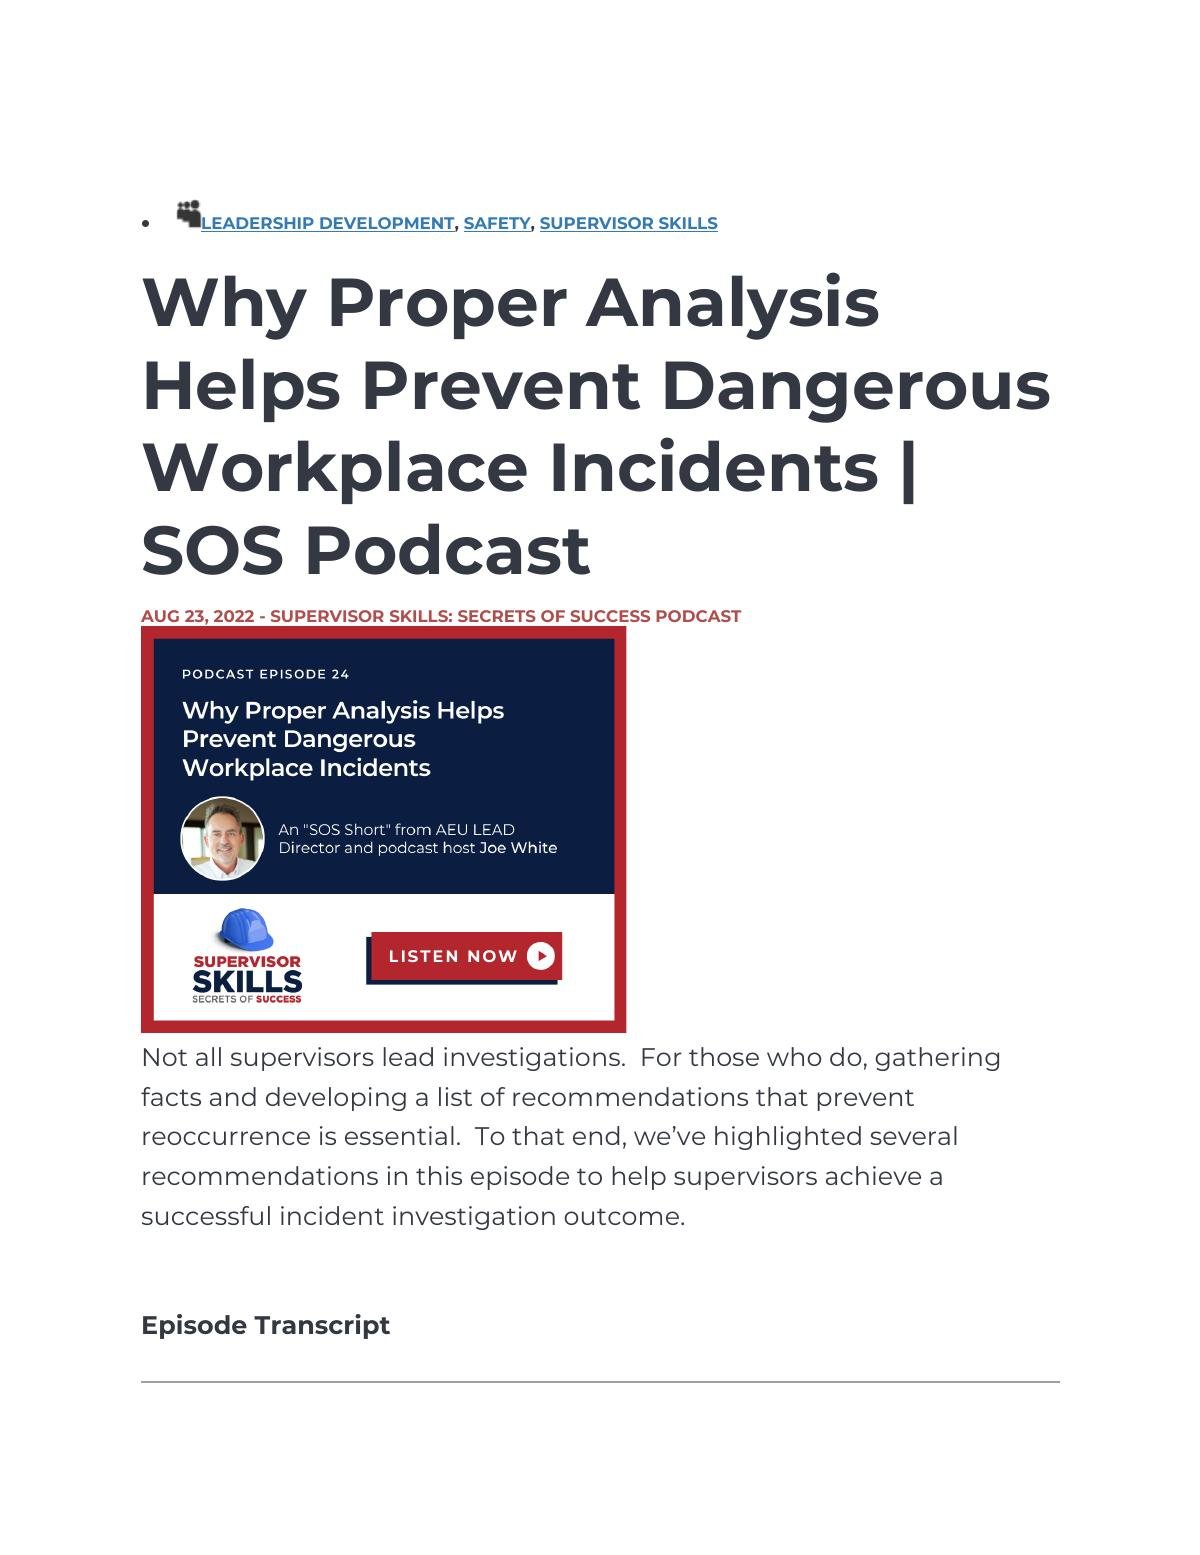 Why Proper Analysis Helps Prevent Dangerous Workplace Incidents | SOS Podcast